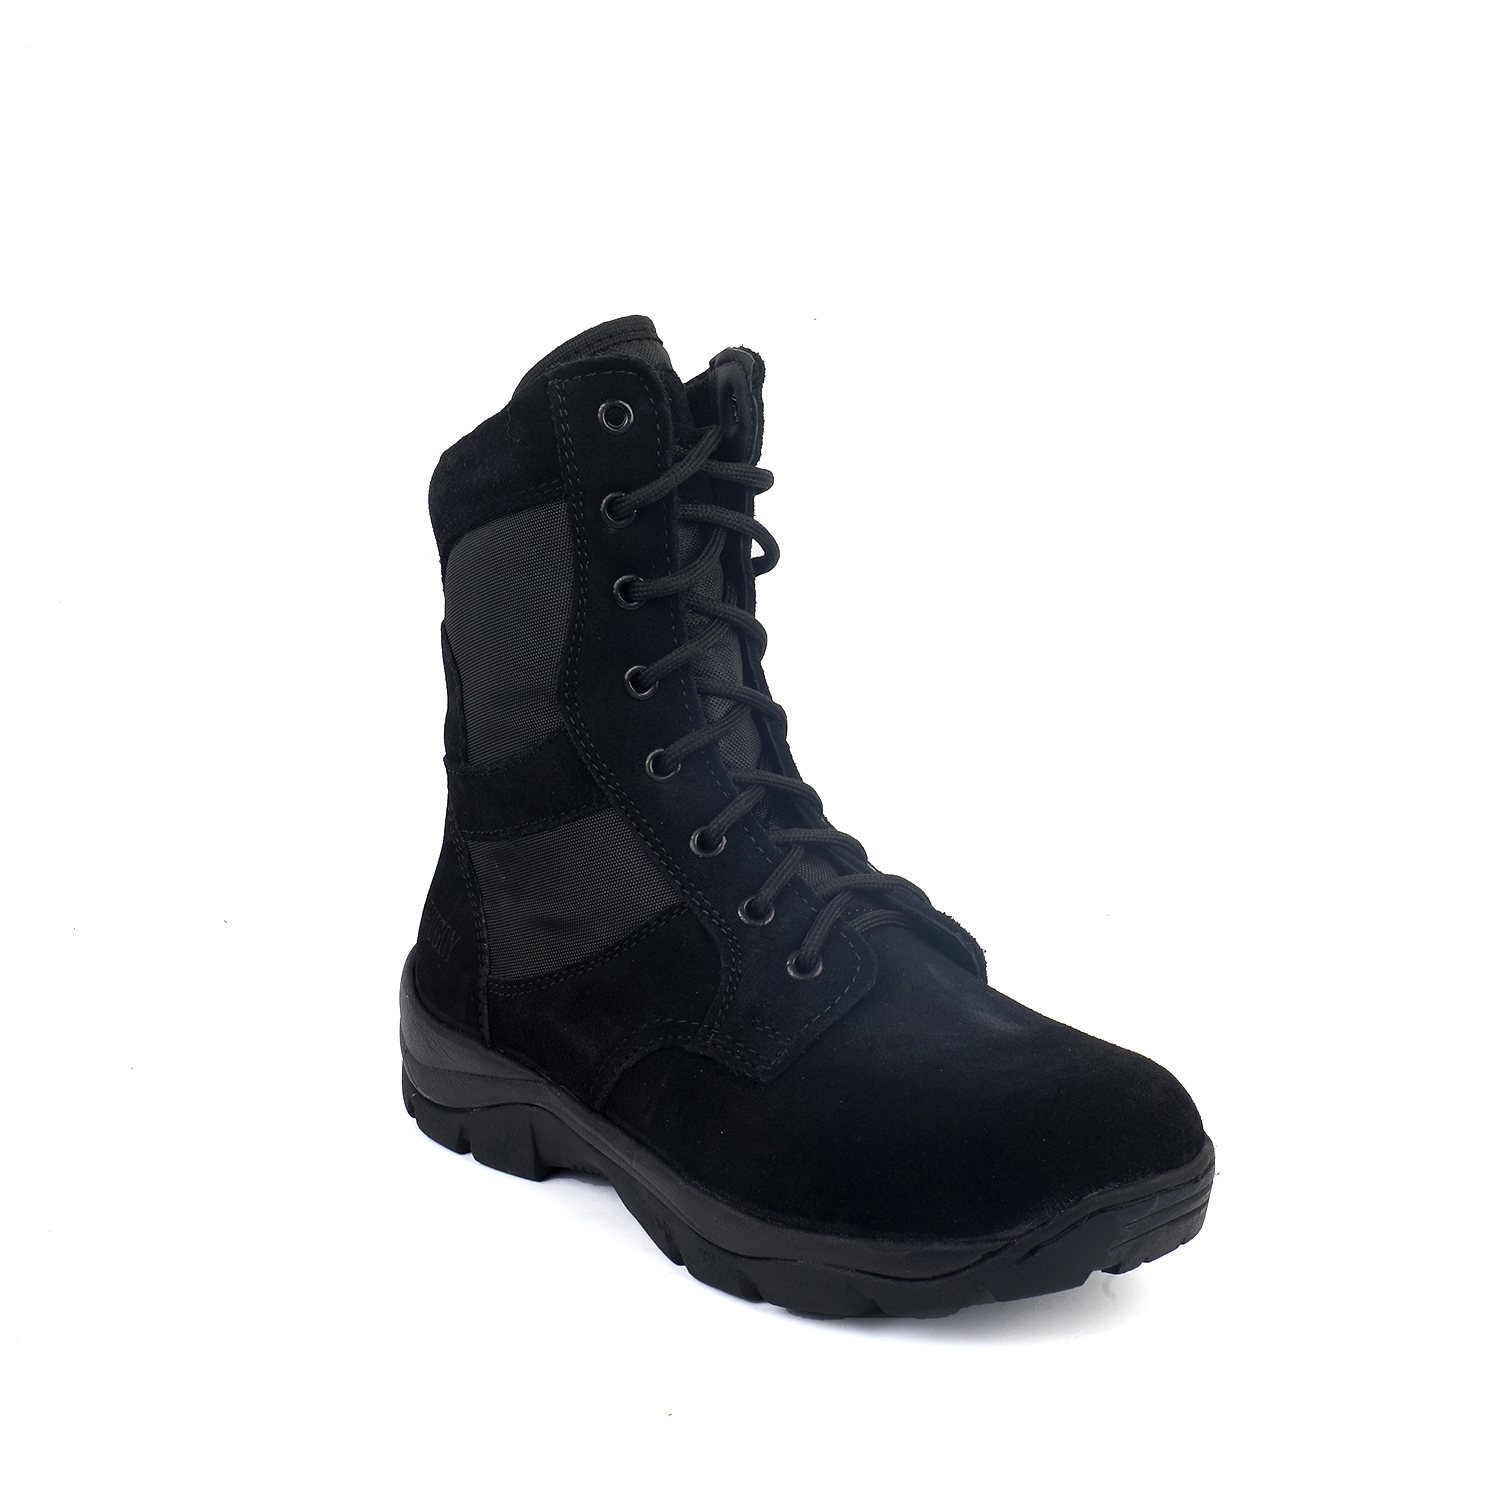 XHUGOY | XHUGOY DB-2 CHAIN BLACK SUEDE Genuine Leather Military Men's Combat Desert Boots -High Ankle- High Top Lace Up